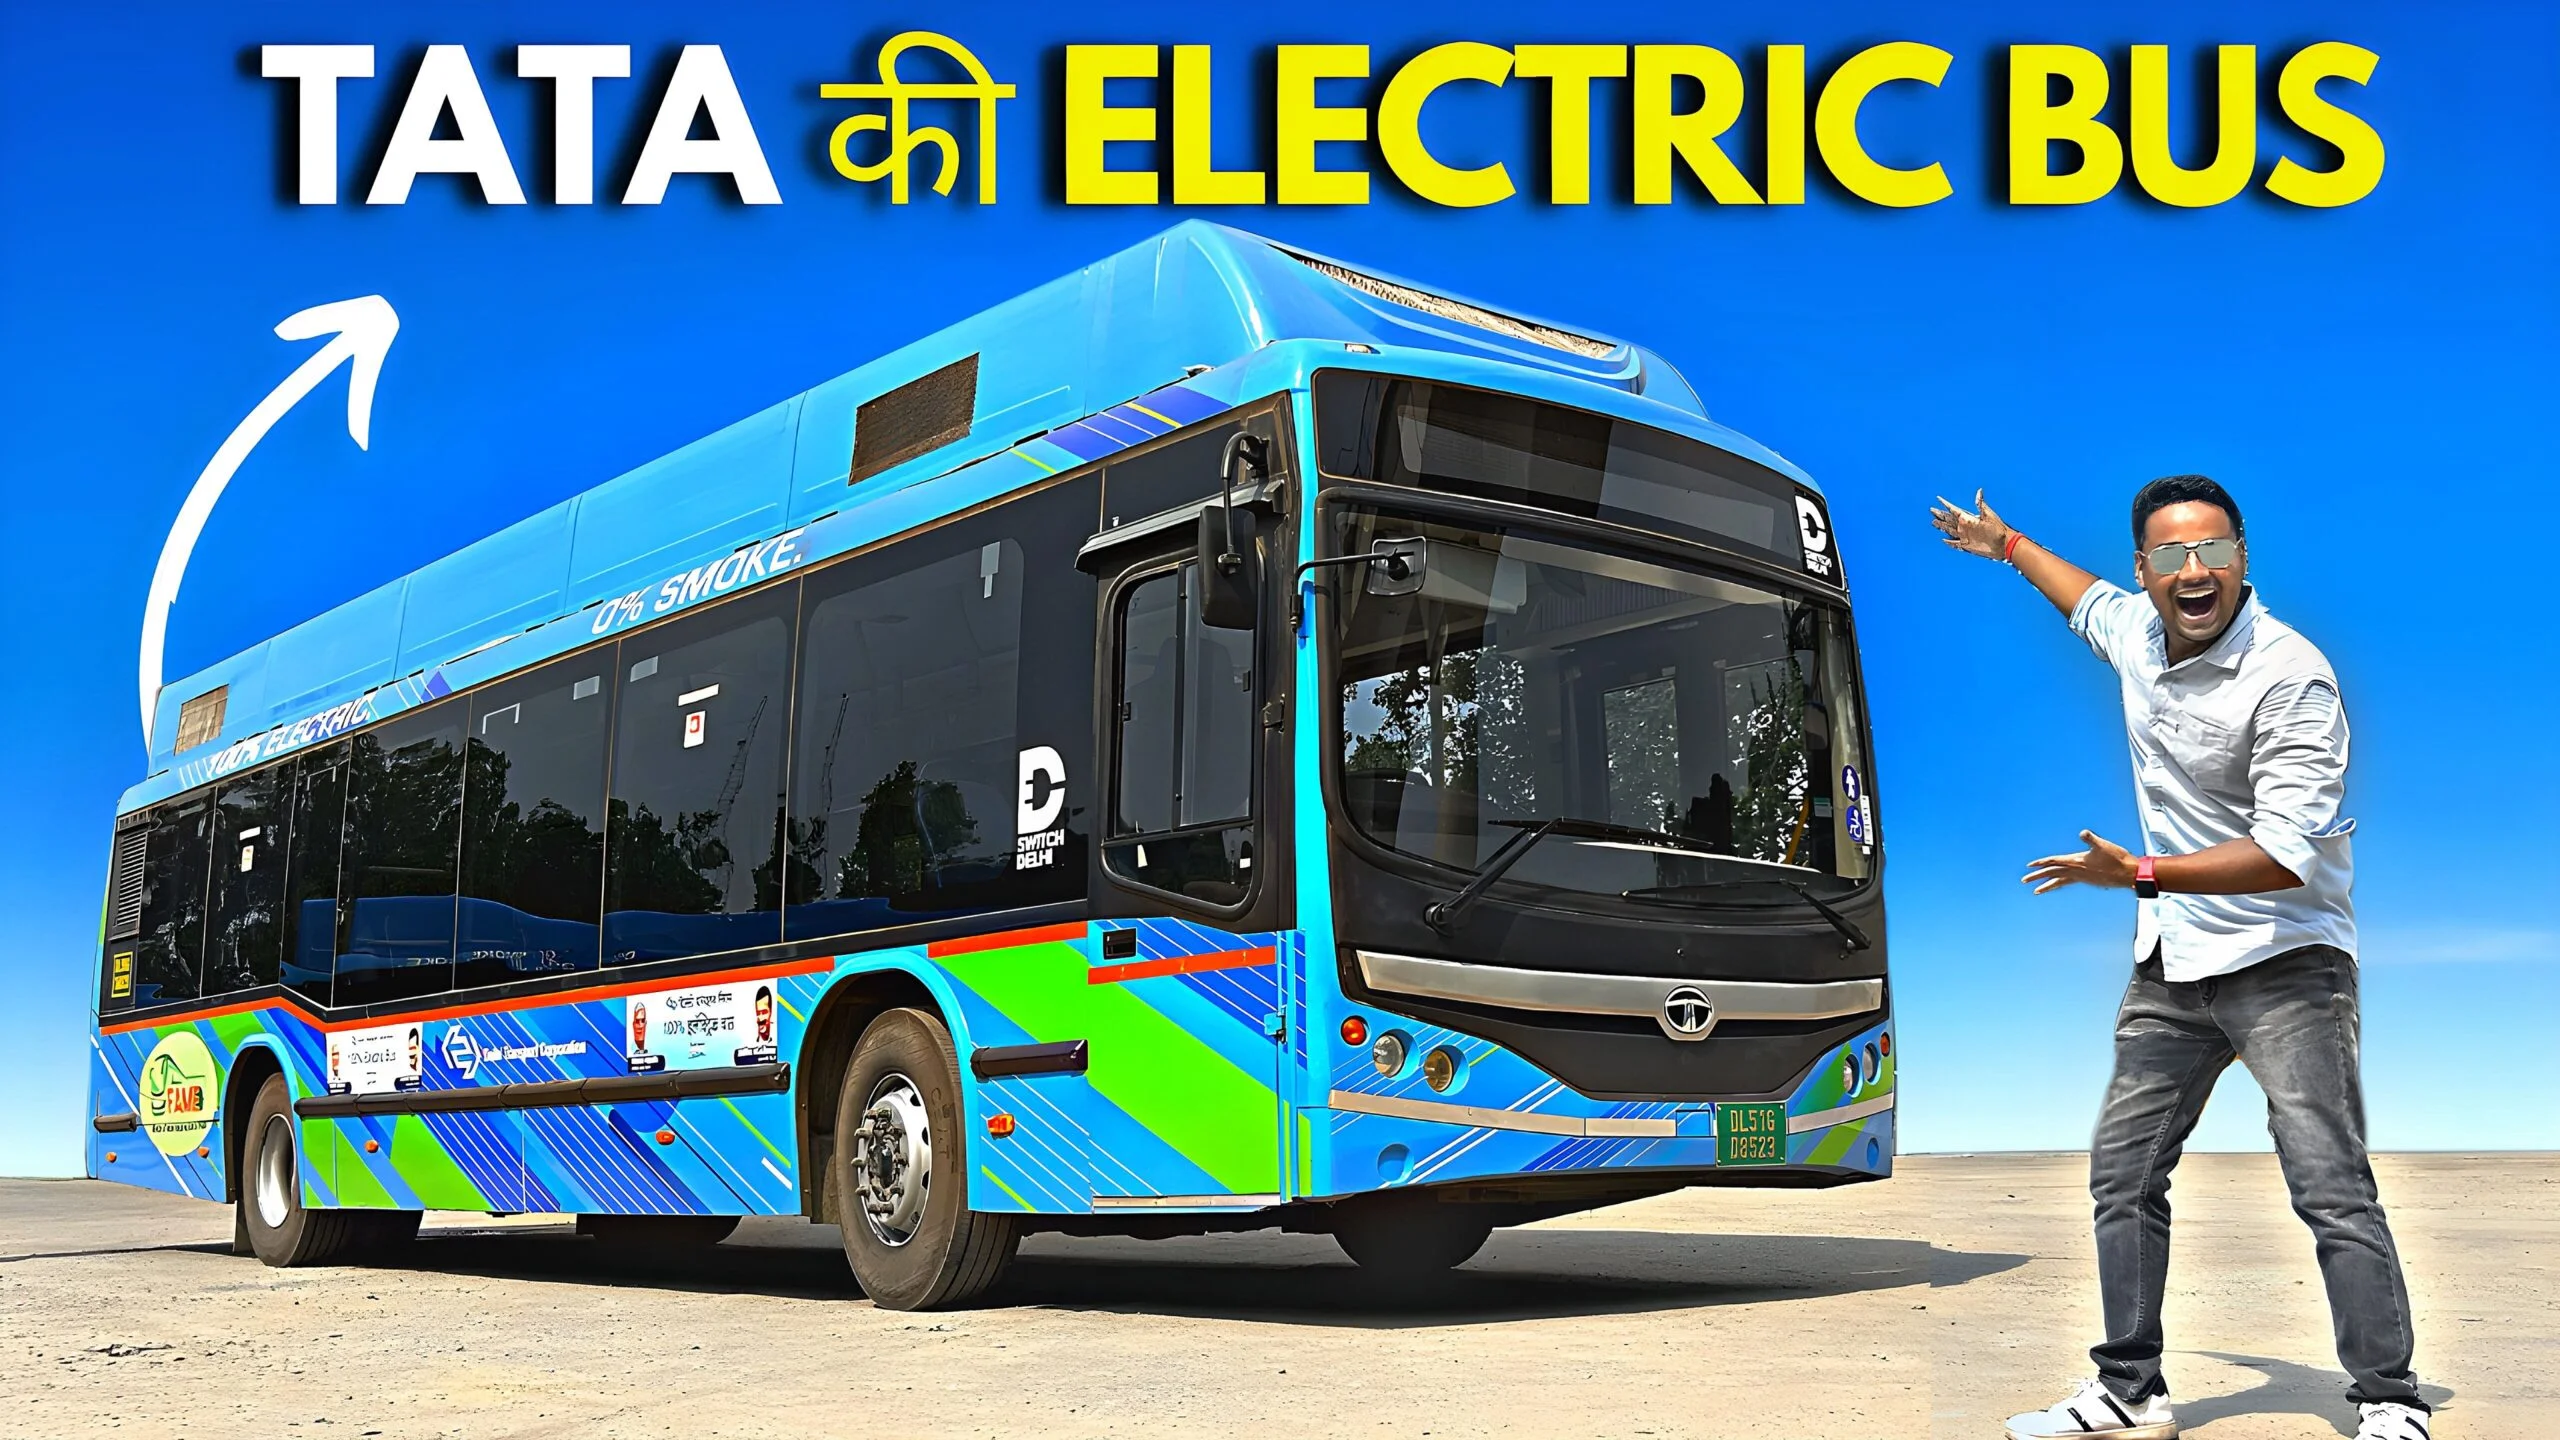 Tata Motor's new Electric bus 😍🔥 Detailed Review